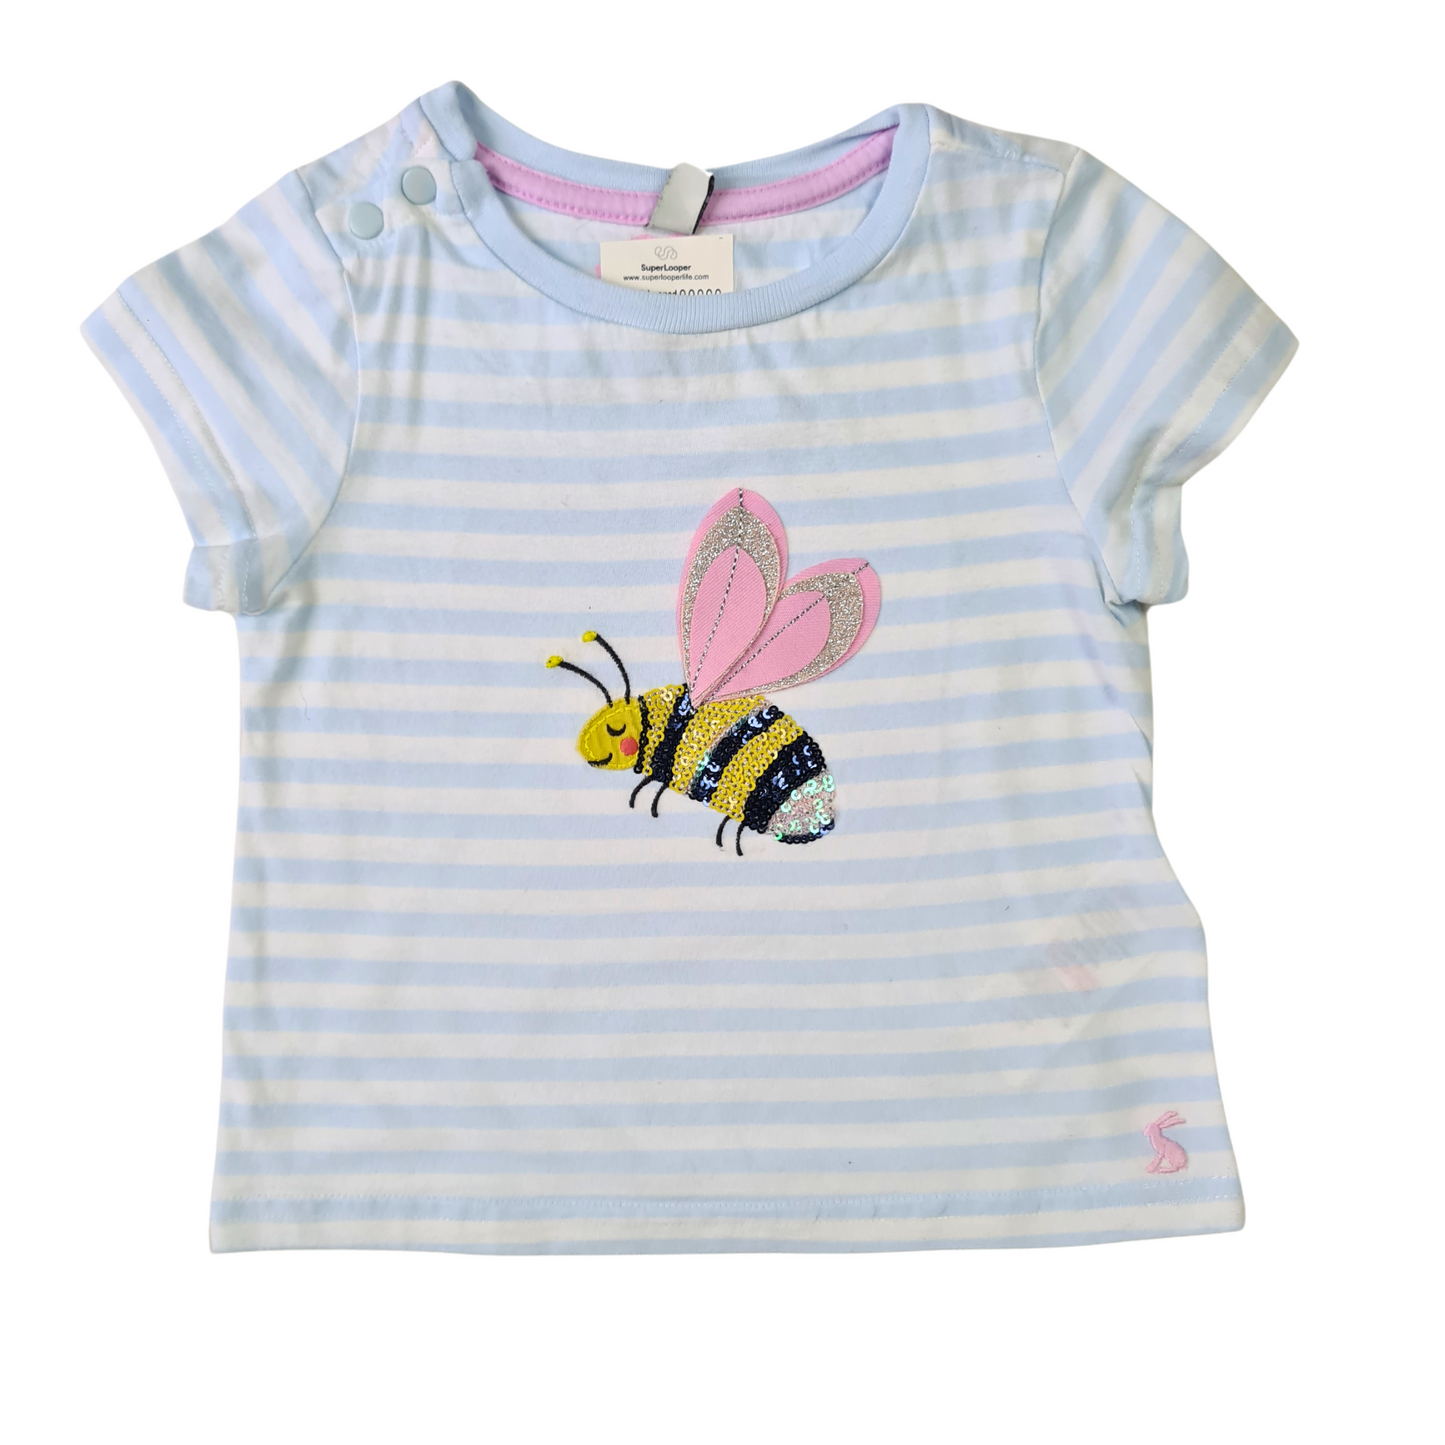 Striped T-Shirt with Sequin Bee Applique